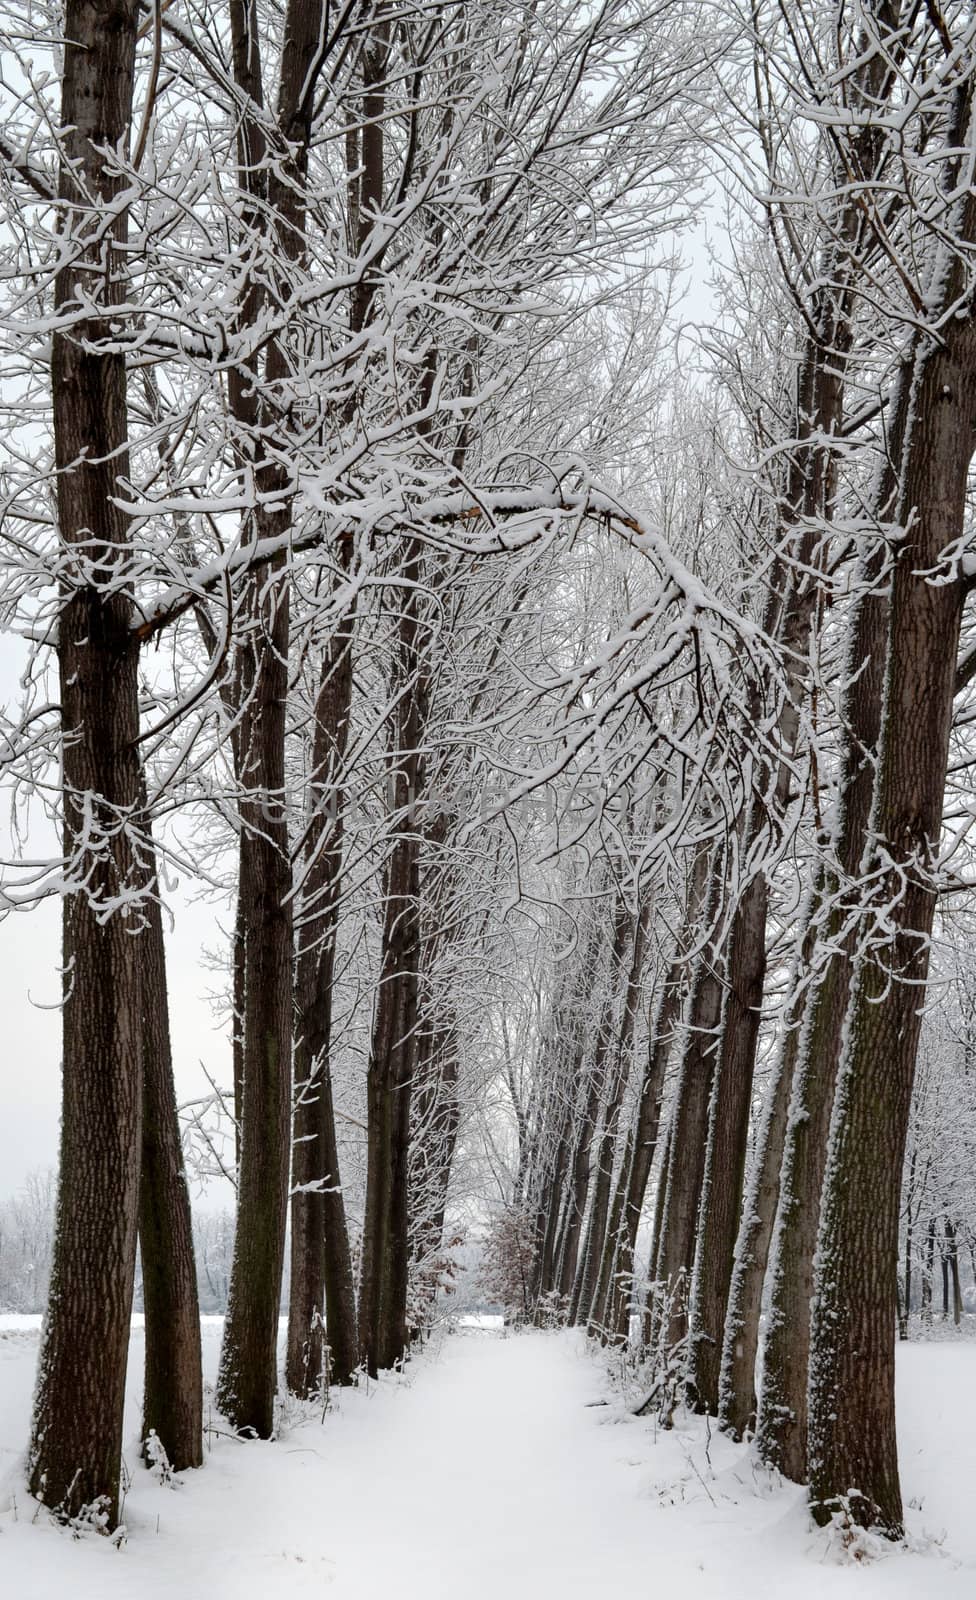 Snowy trees in line by artofphoto